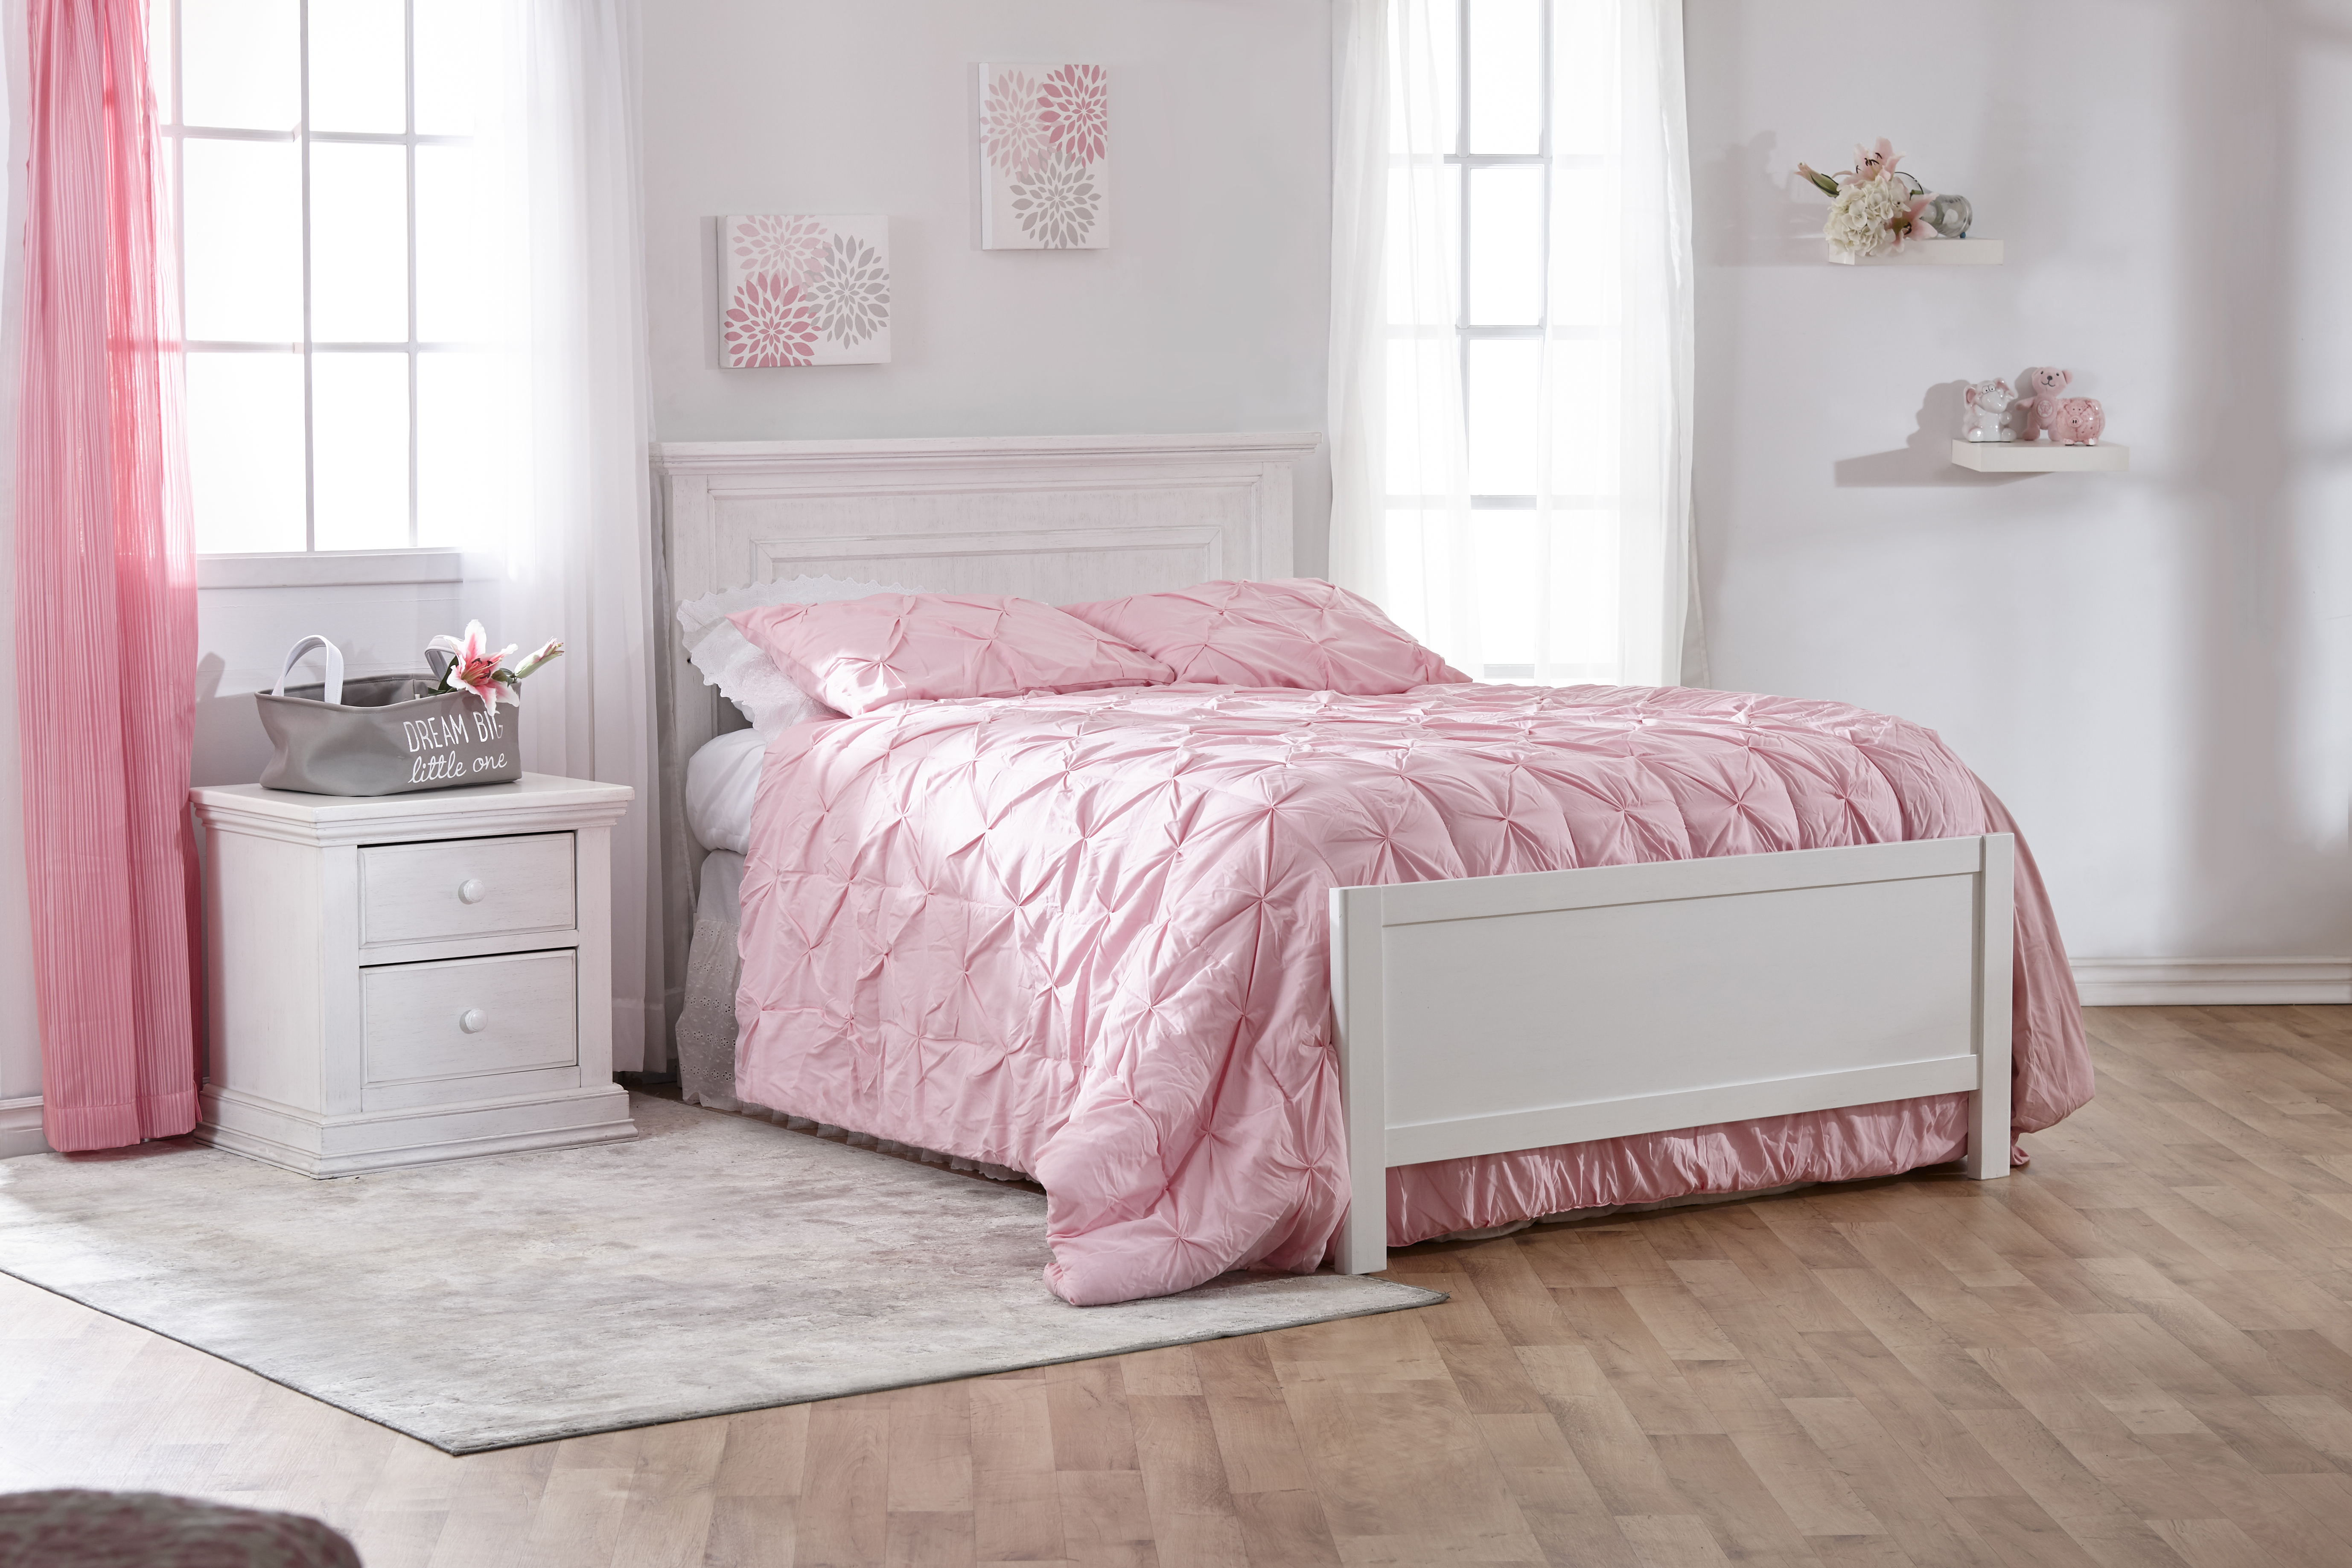 The <b>Modena Forever Crib</b>, converted into a <b>full-size bed</b>, with the Low Profile Footboard (sold separately), in Vintage White.